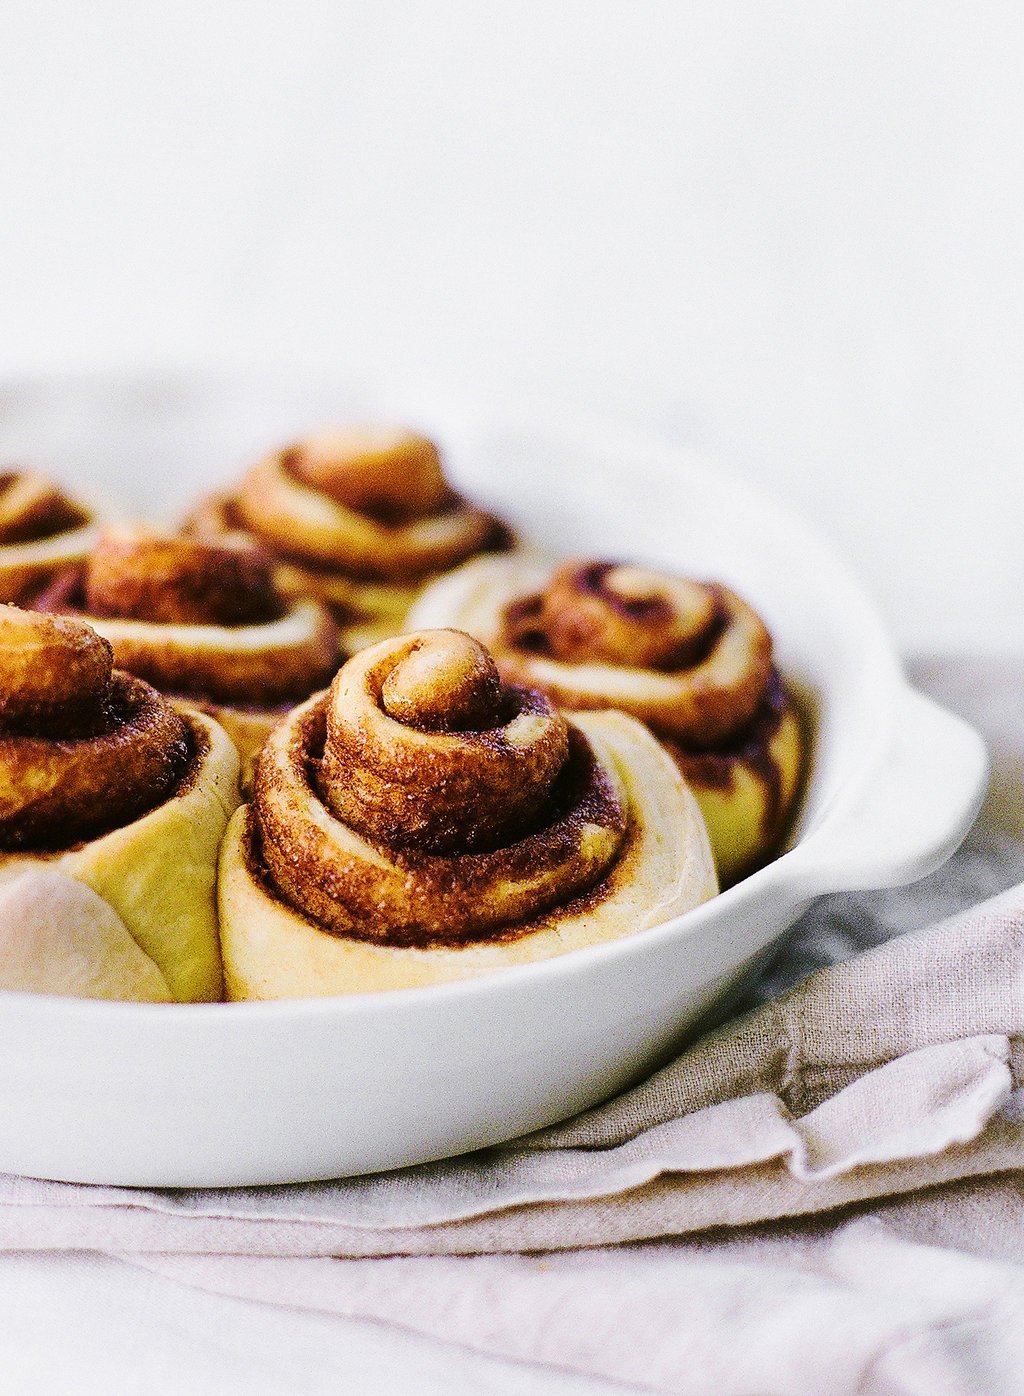 My ultimate simple dough recipe can be used to make anything, even fluffy cinnamon rolls! Tons of baking tips, make ahead advice, and yeast tricks included.